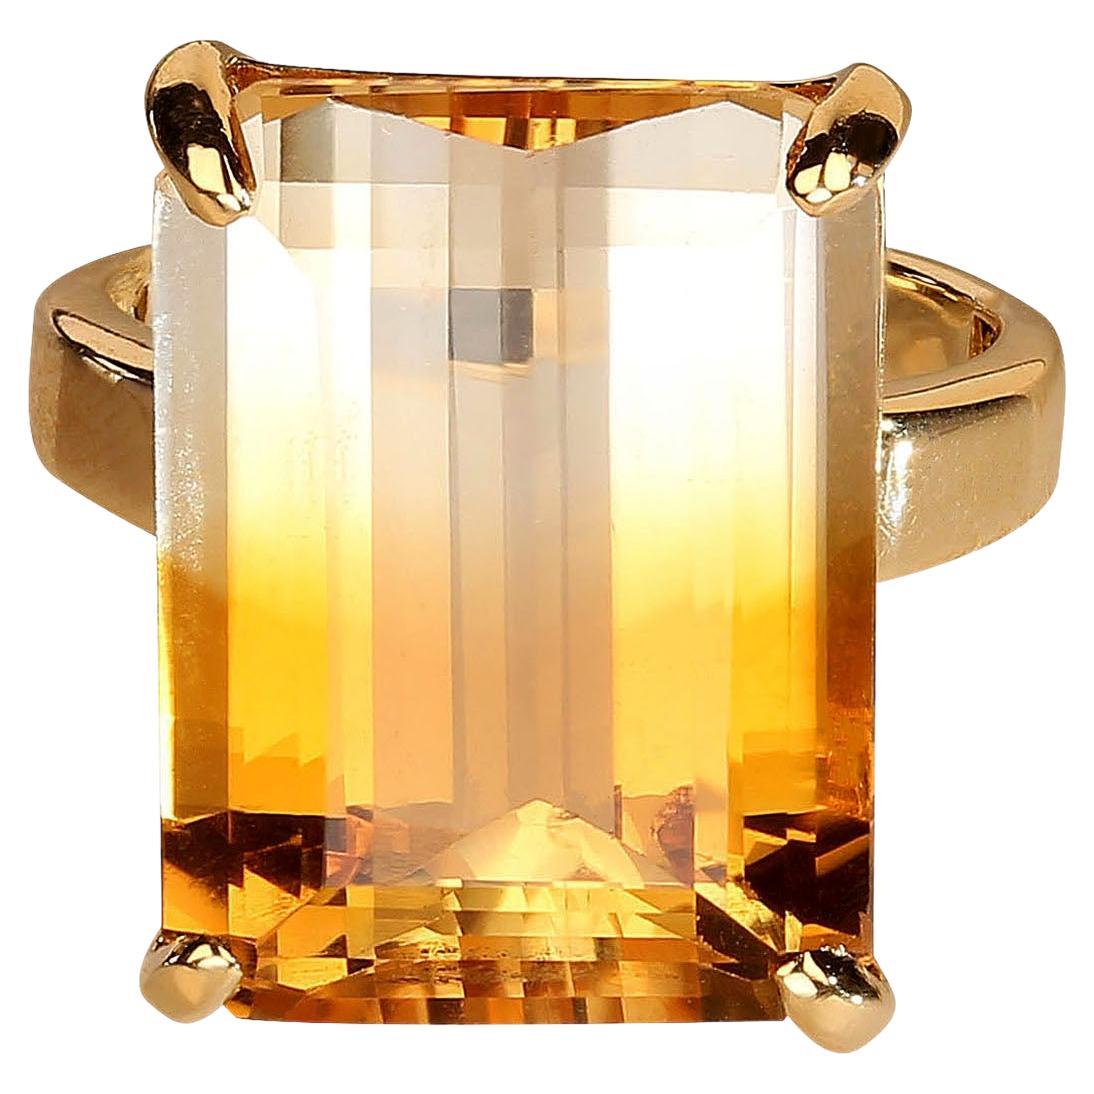 Bespoke Citrine and 18K yellow gold ring. This unique bi color Citrine is eye candy especially in the rich yellow 18K handmade setting. The large, 18x13mm, emerald cut is perfect. This gemstone sparkles and dances on your finger.  Its energy will